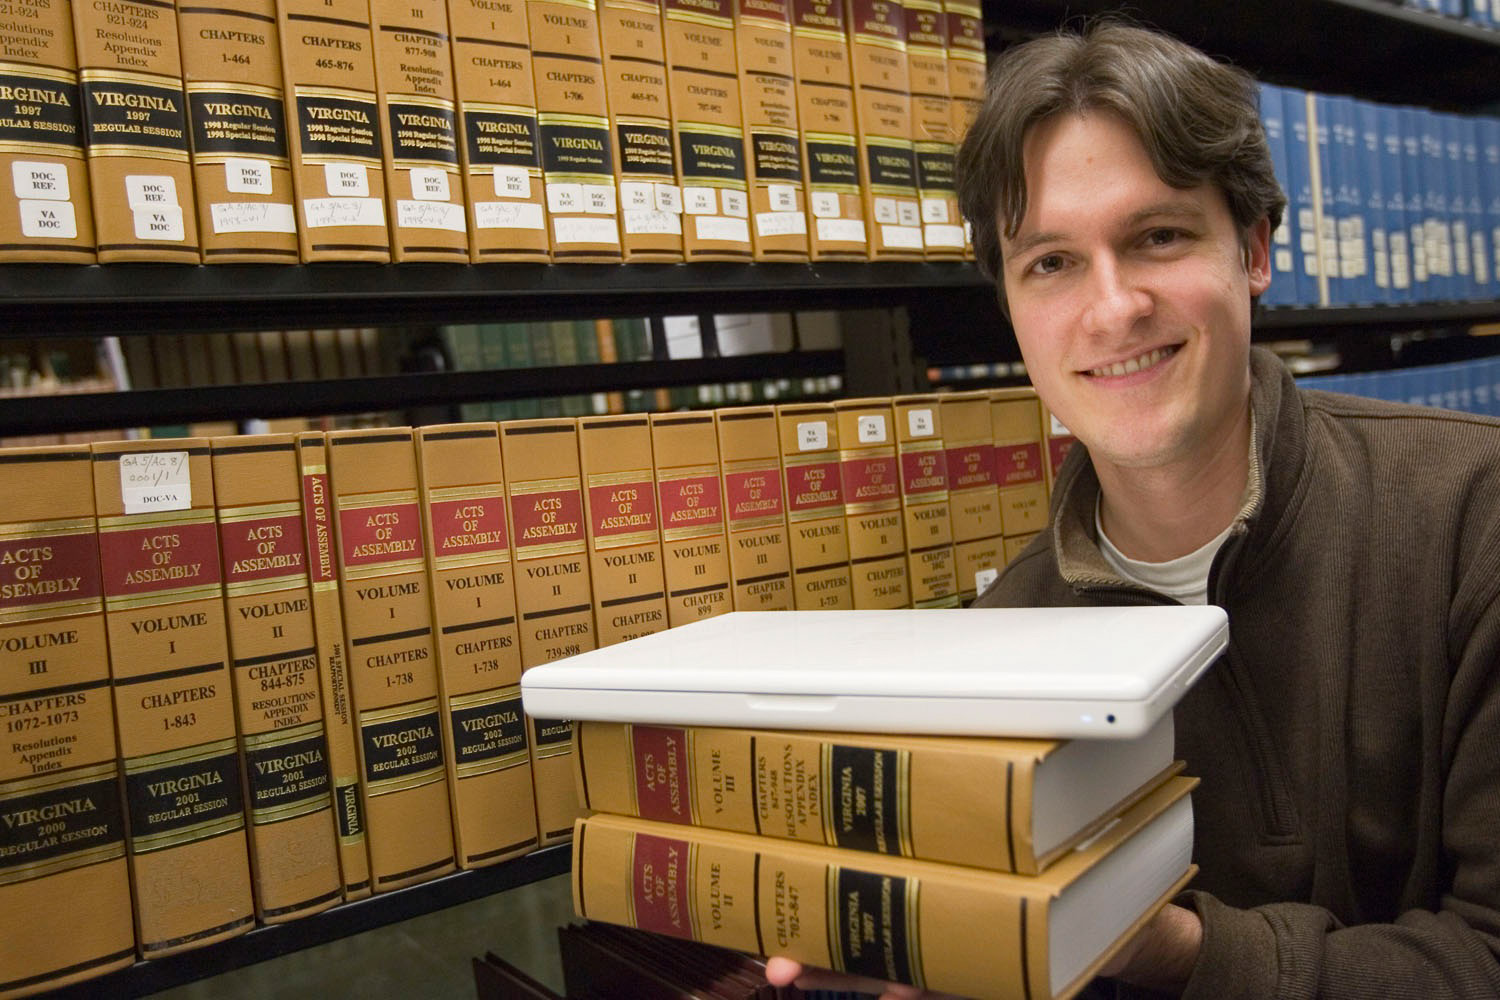 Waldo Jaquith holds to law books and a laptop